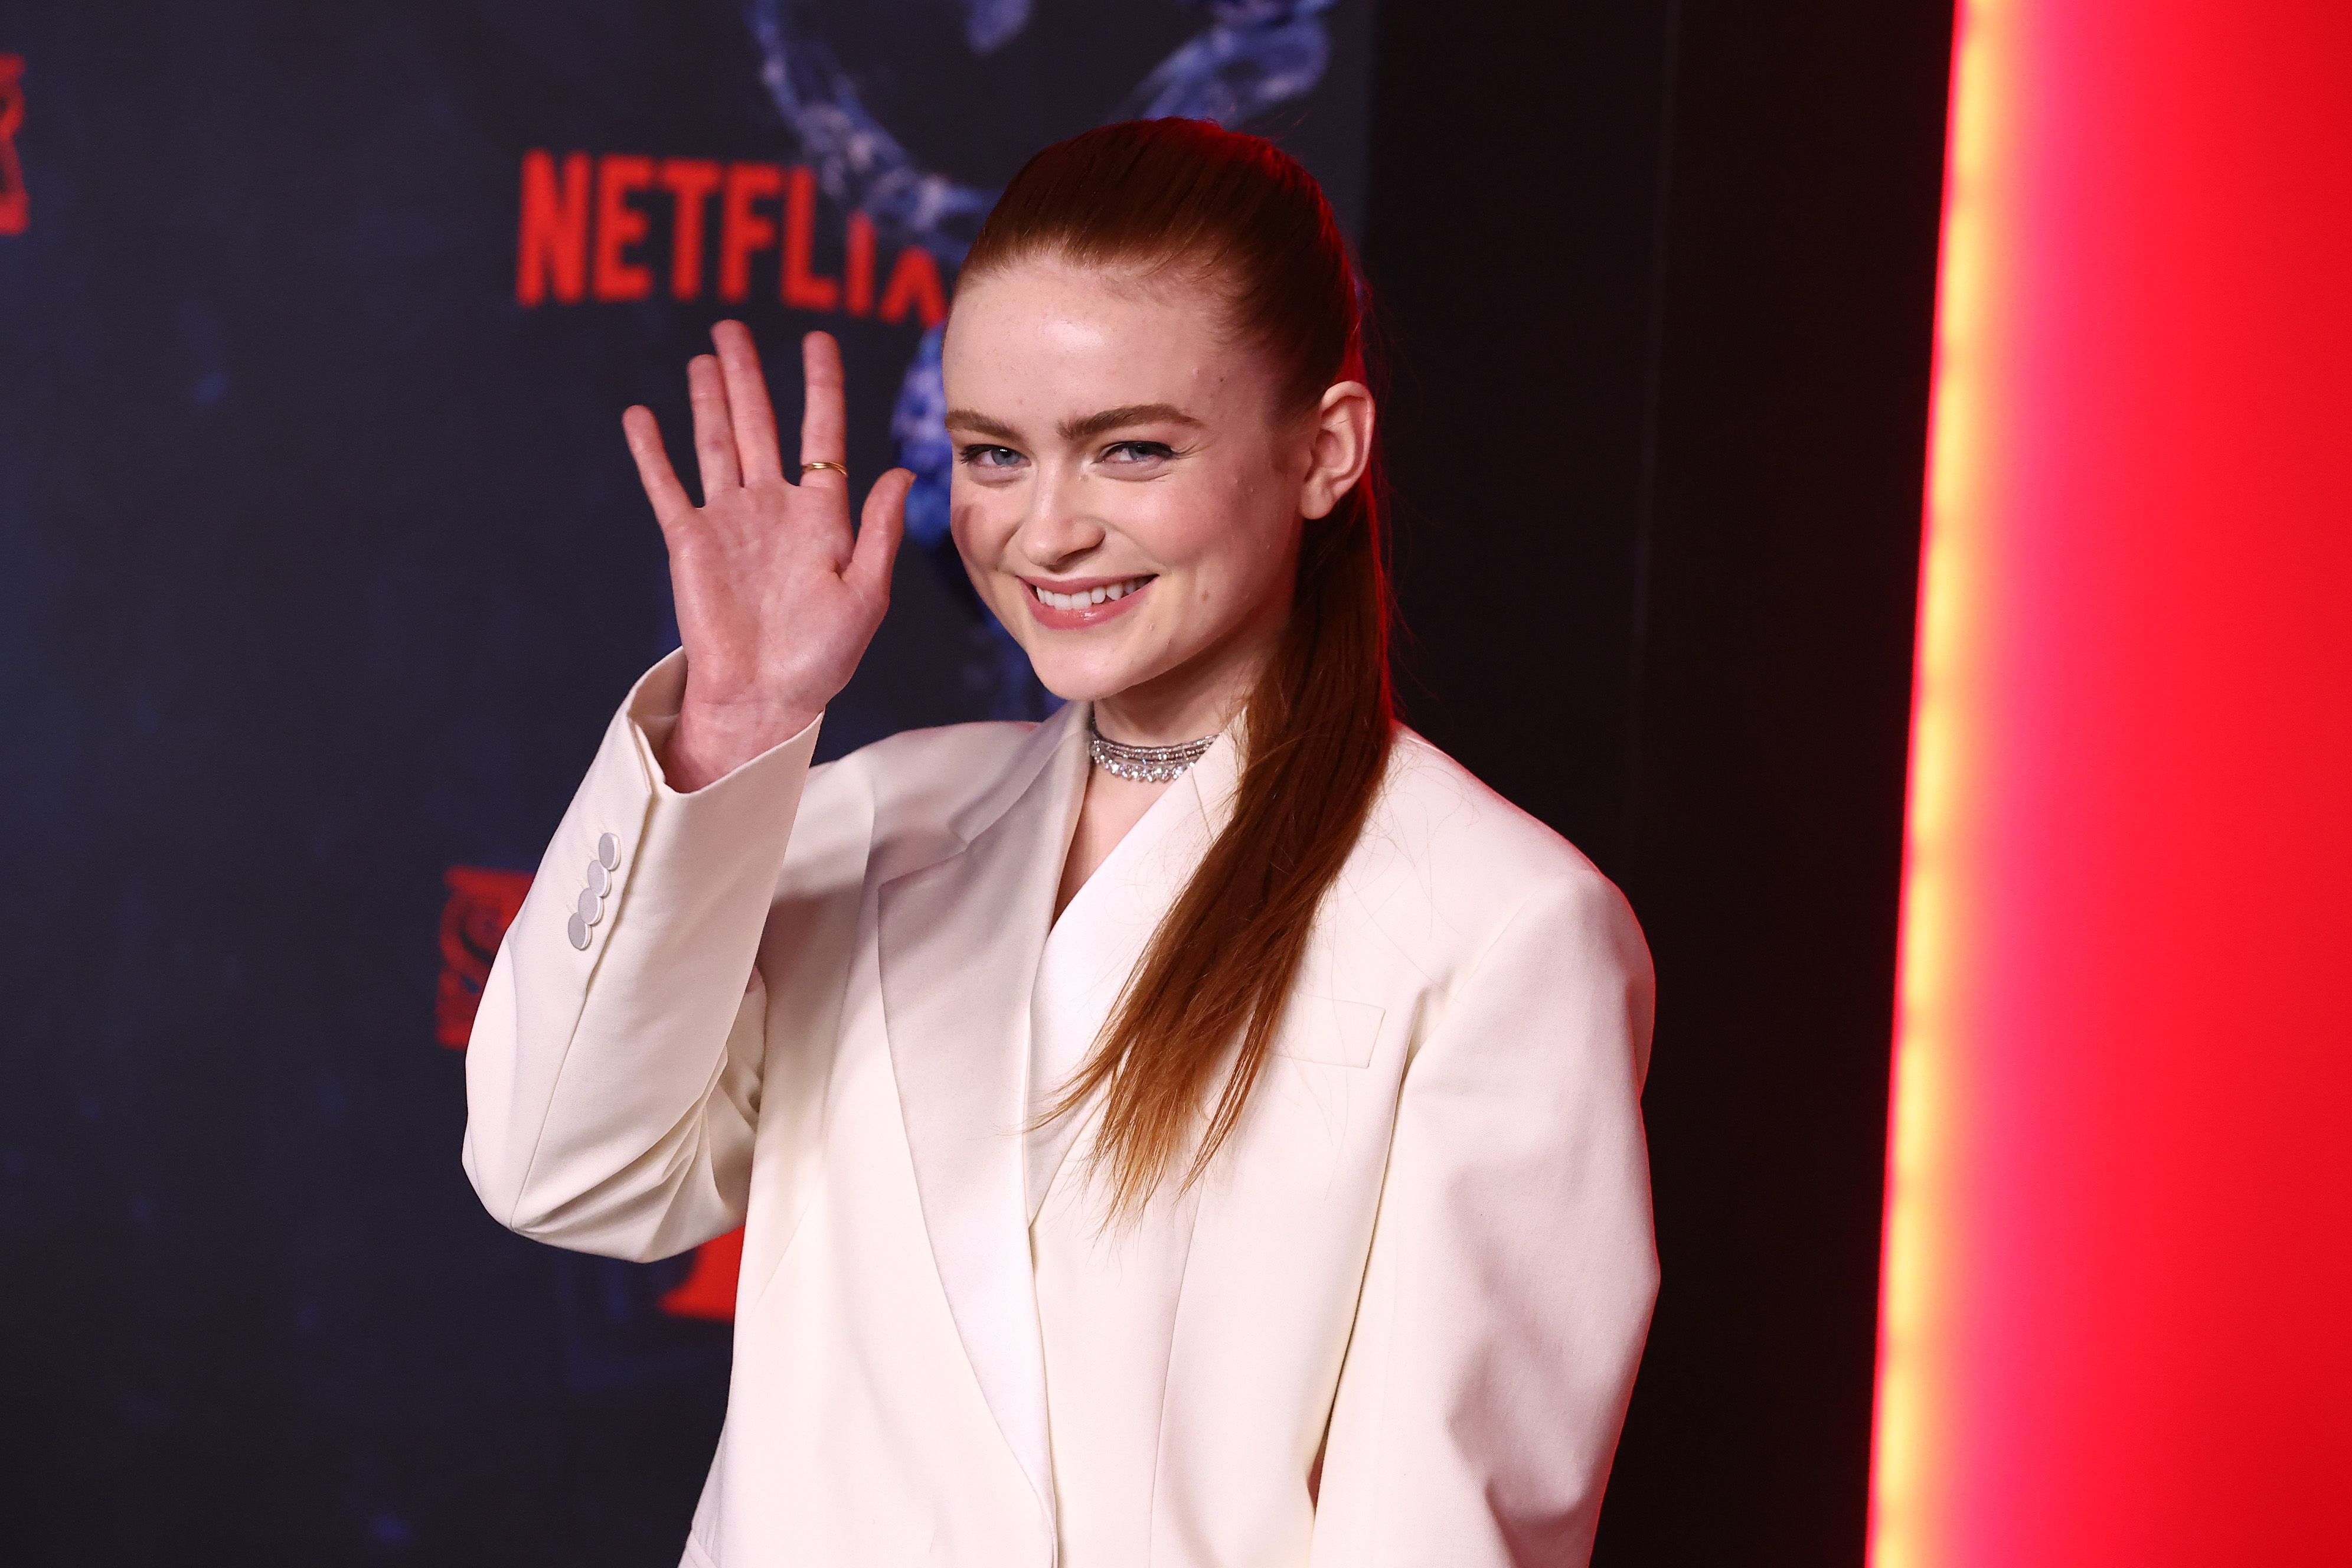 Sadie Sink attends the premiere of Stranger Things season 4 for Netflix